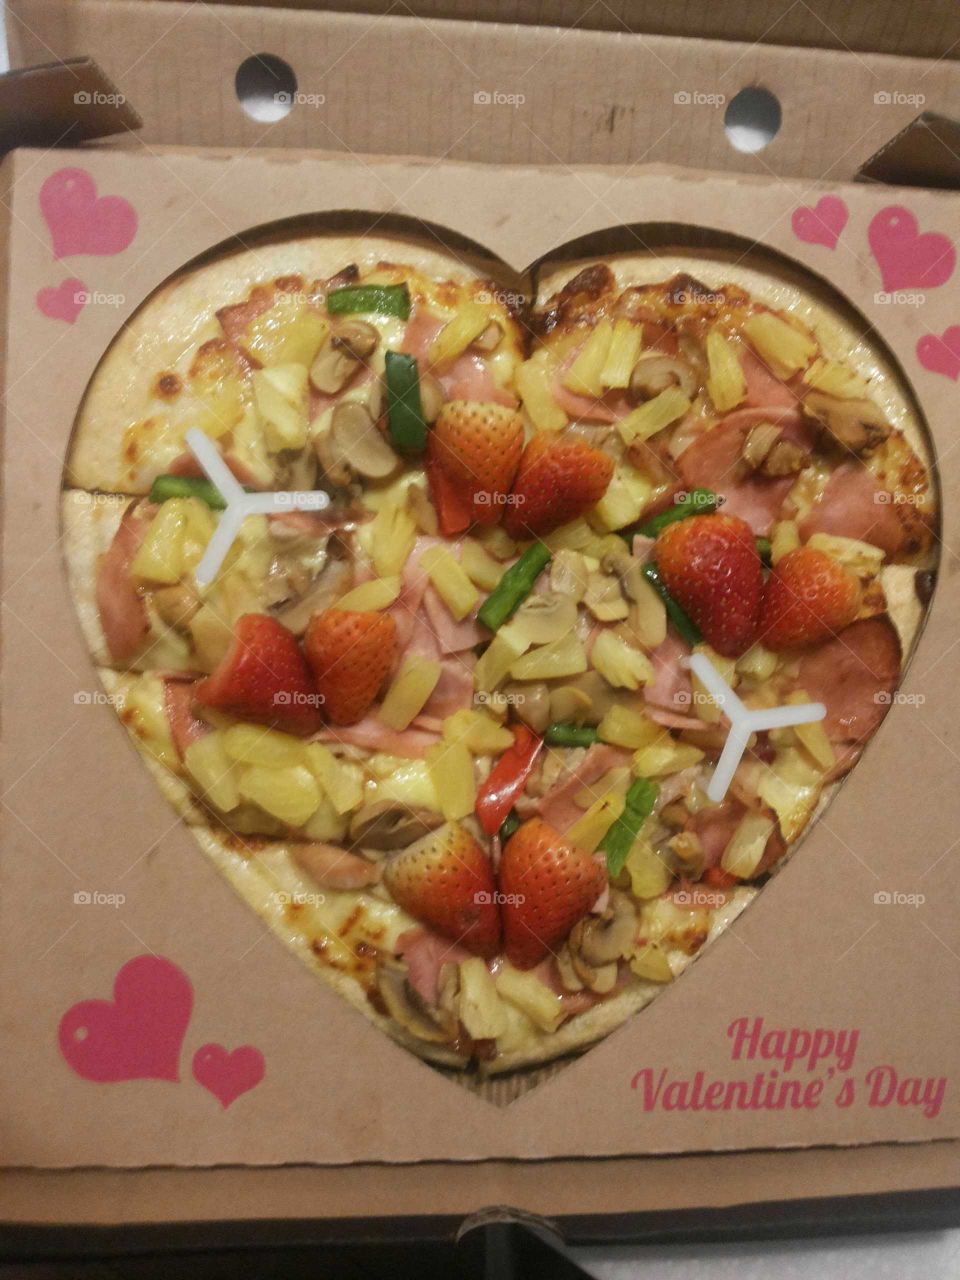 Loveable pizza for Valentine's day